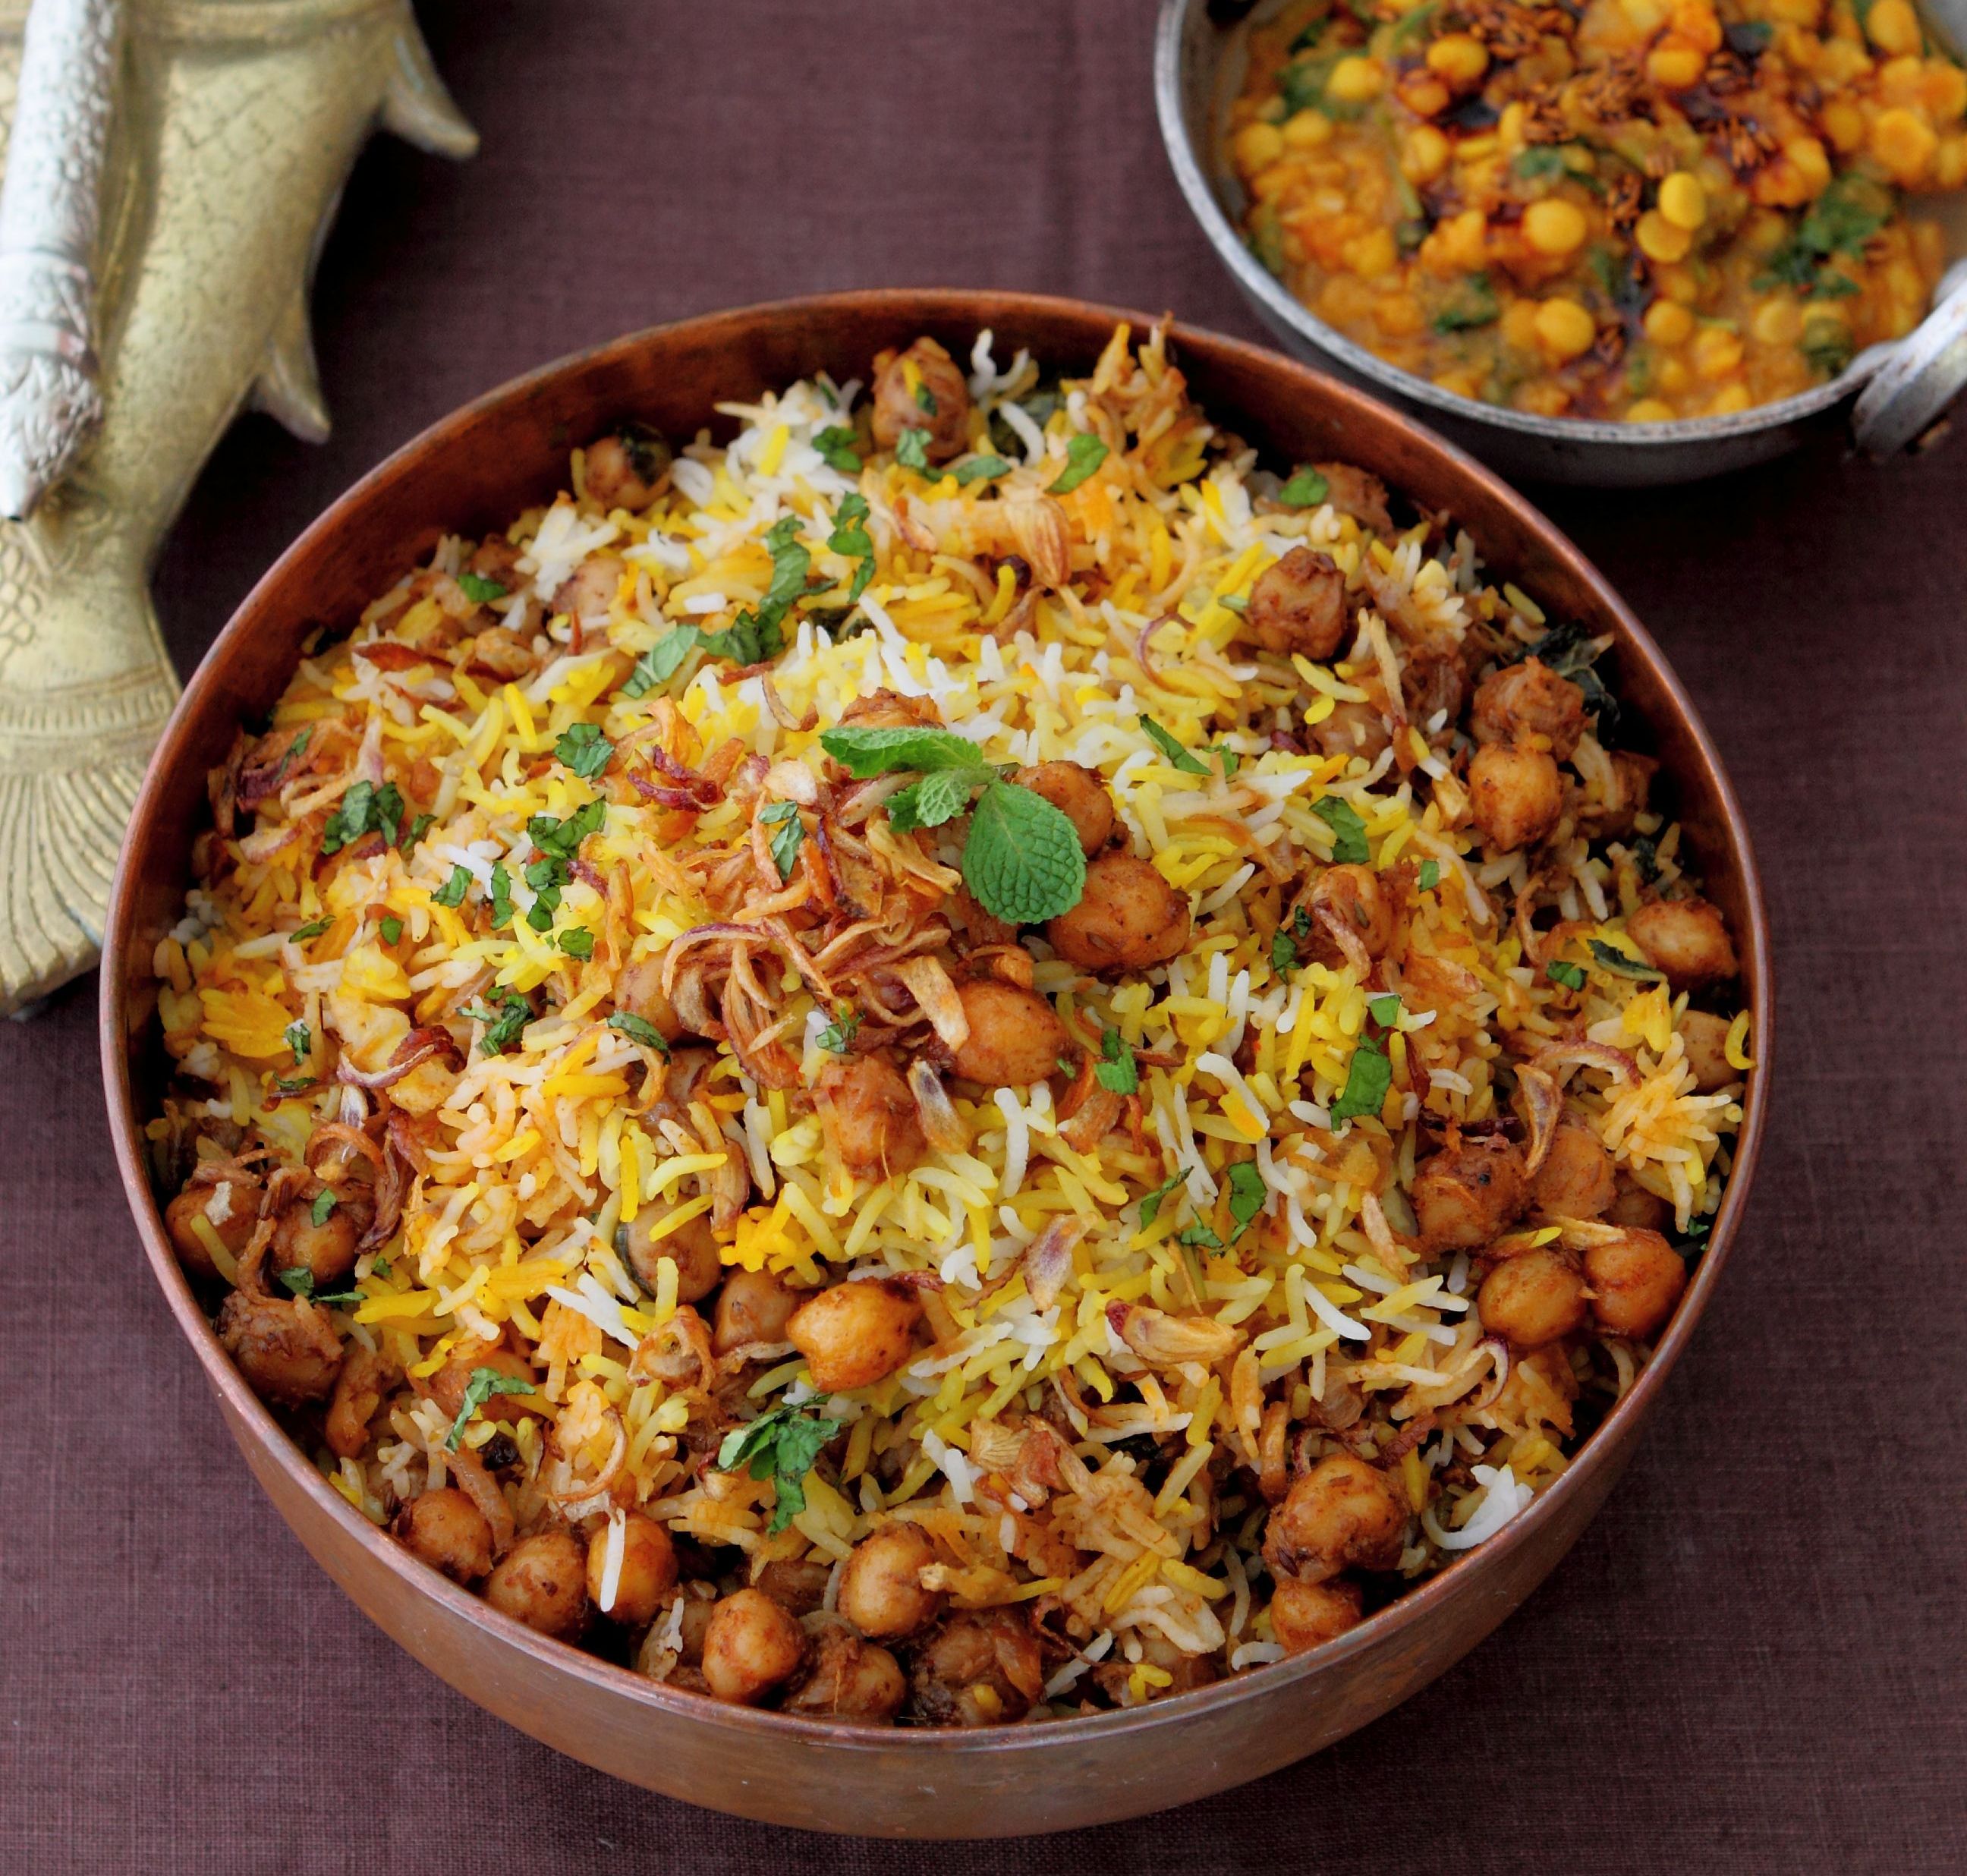 Quobuli Pulao (Rice and Chickpeas Pilaf)